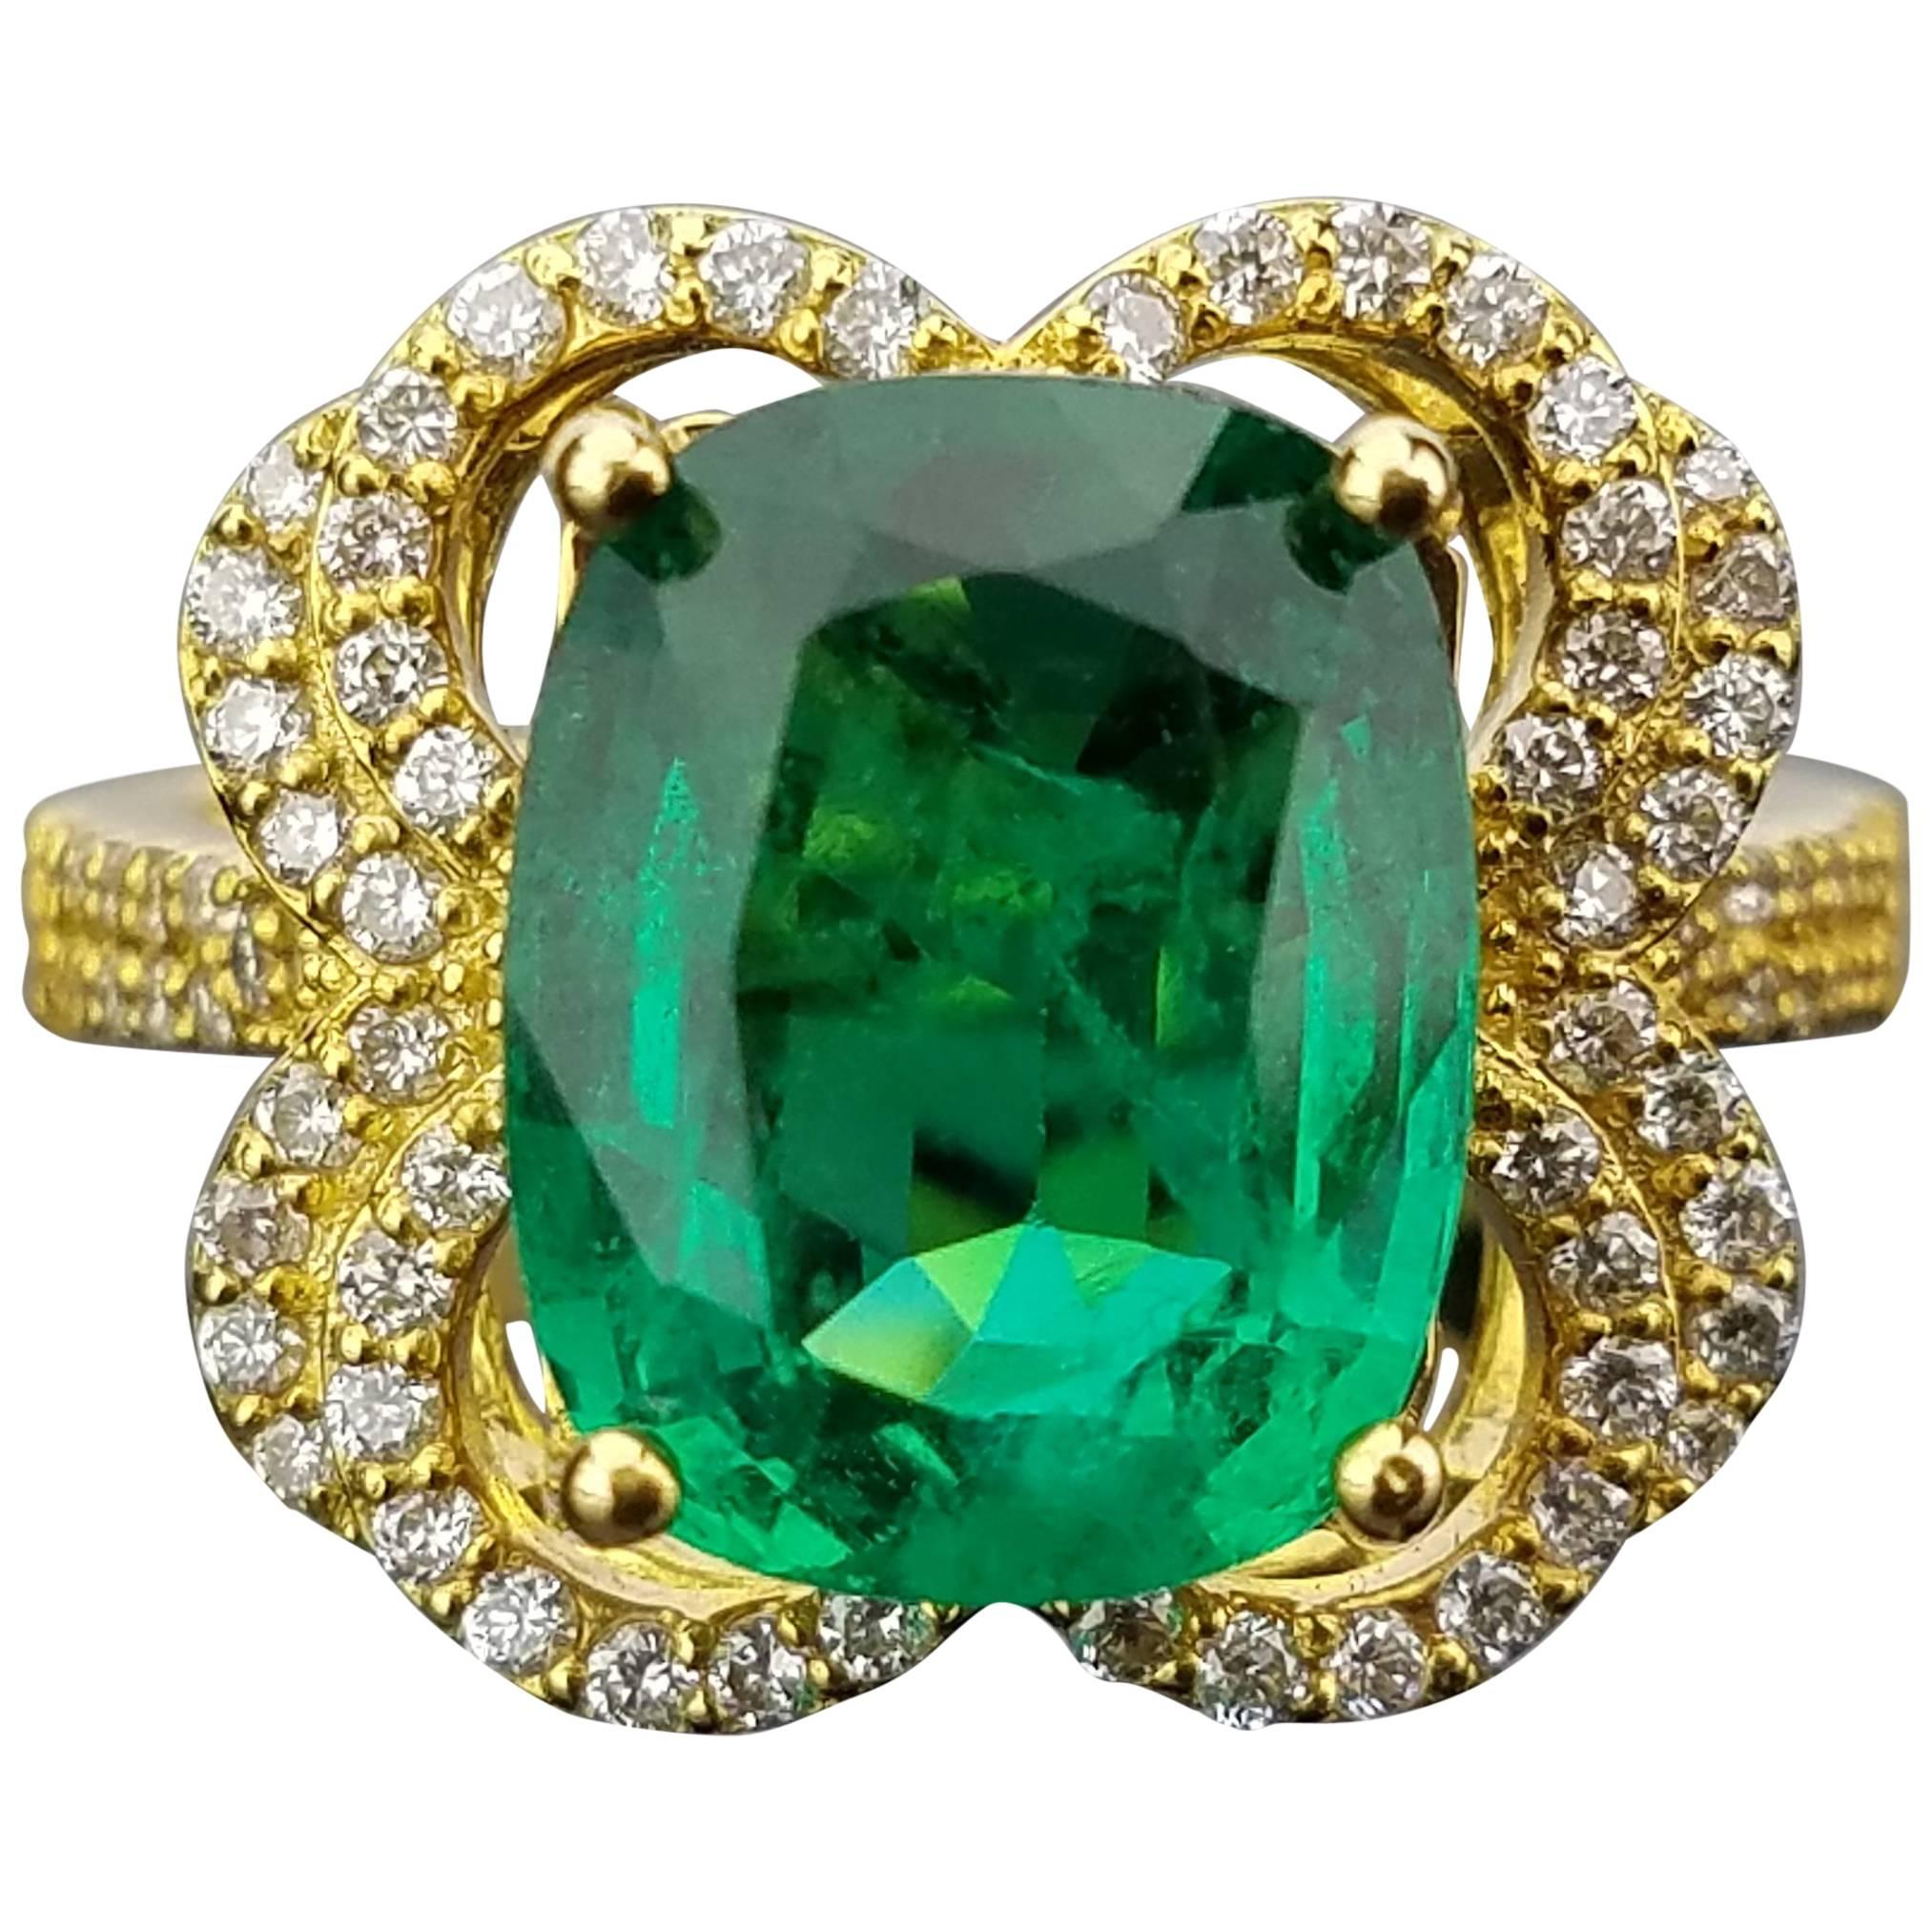 4.77 Carat Cushion Shaped Emerald and Diamond Cocktail Ring